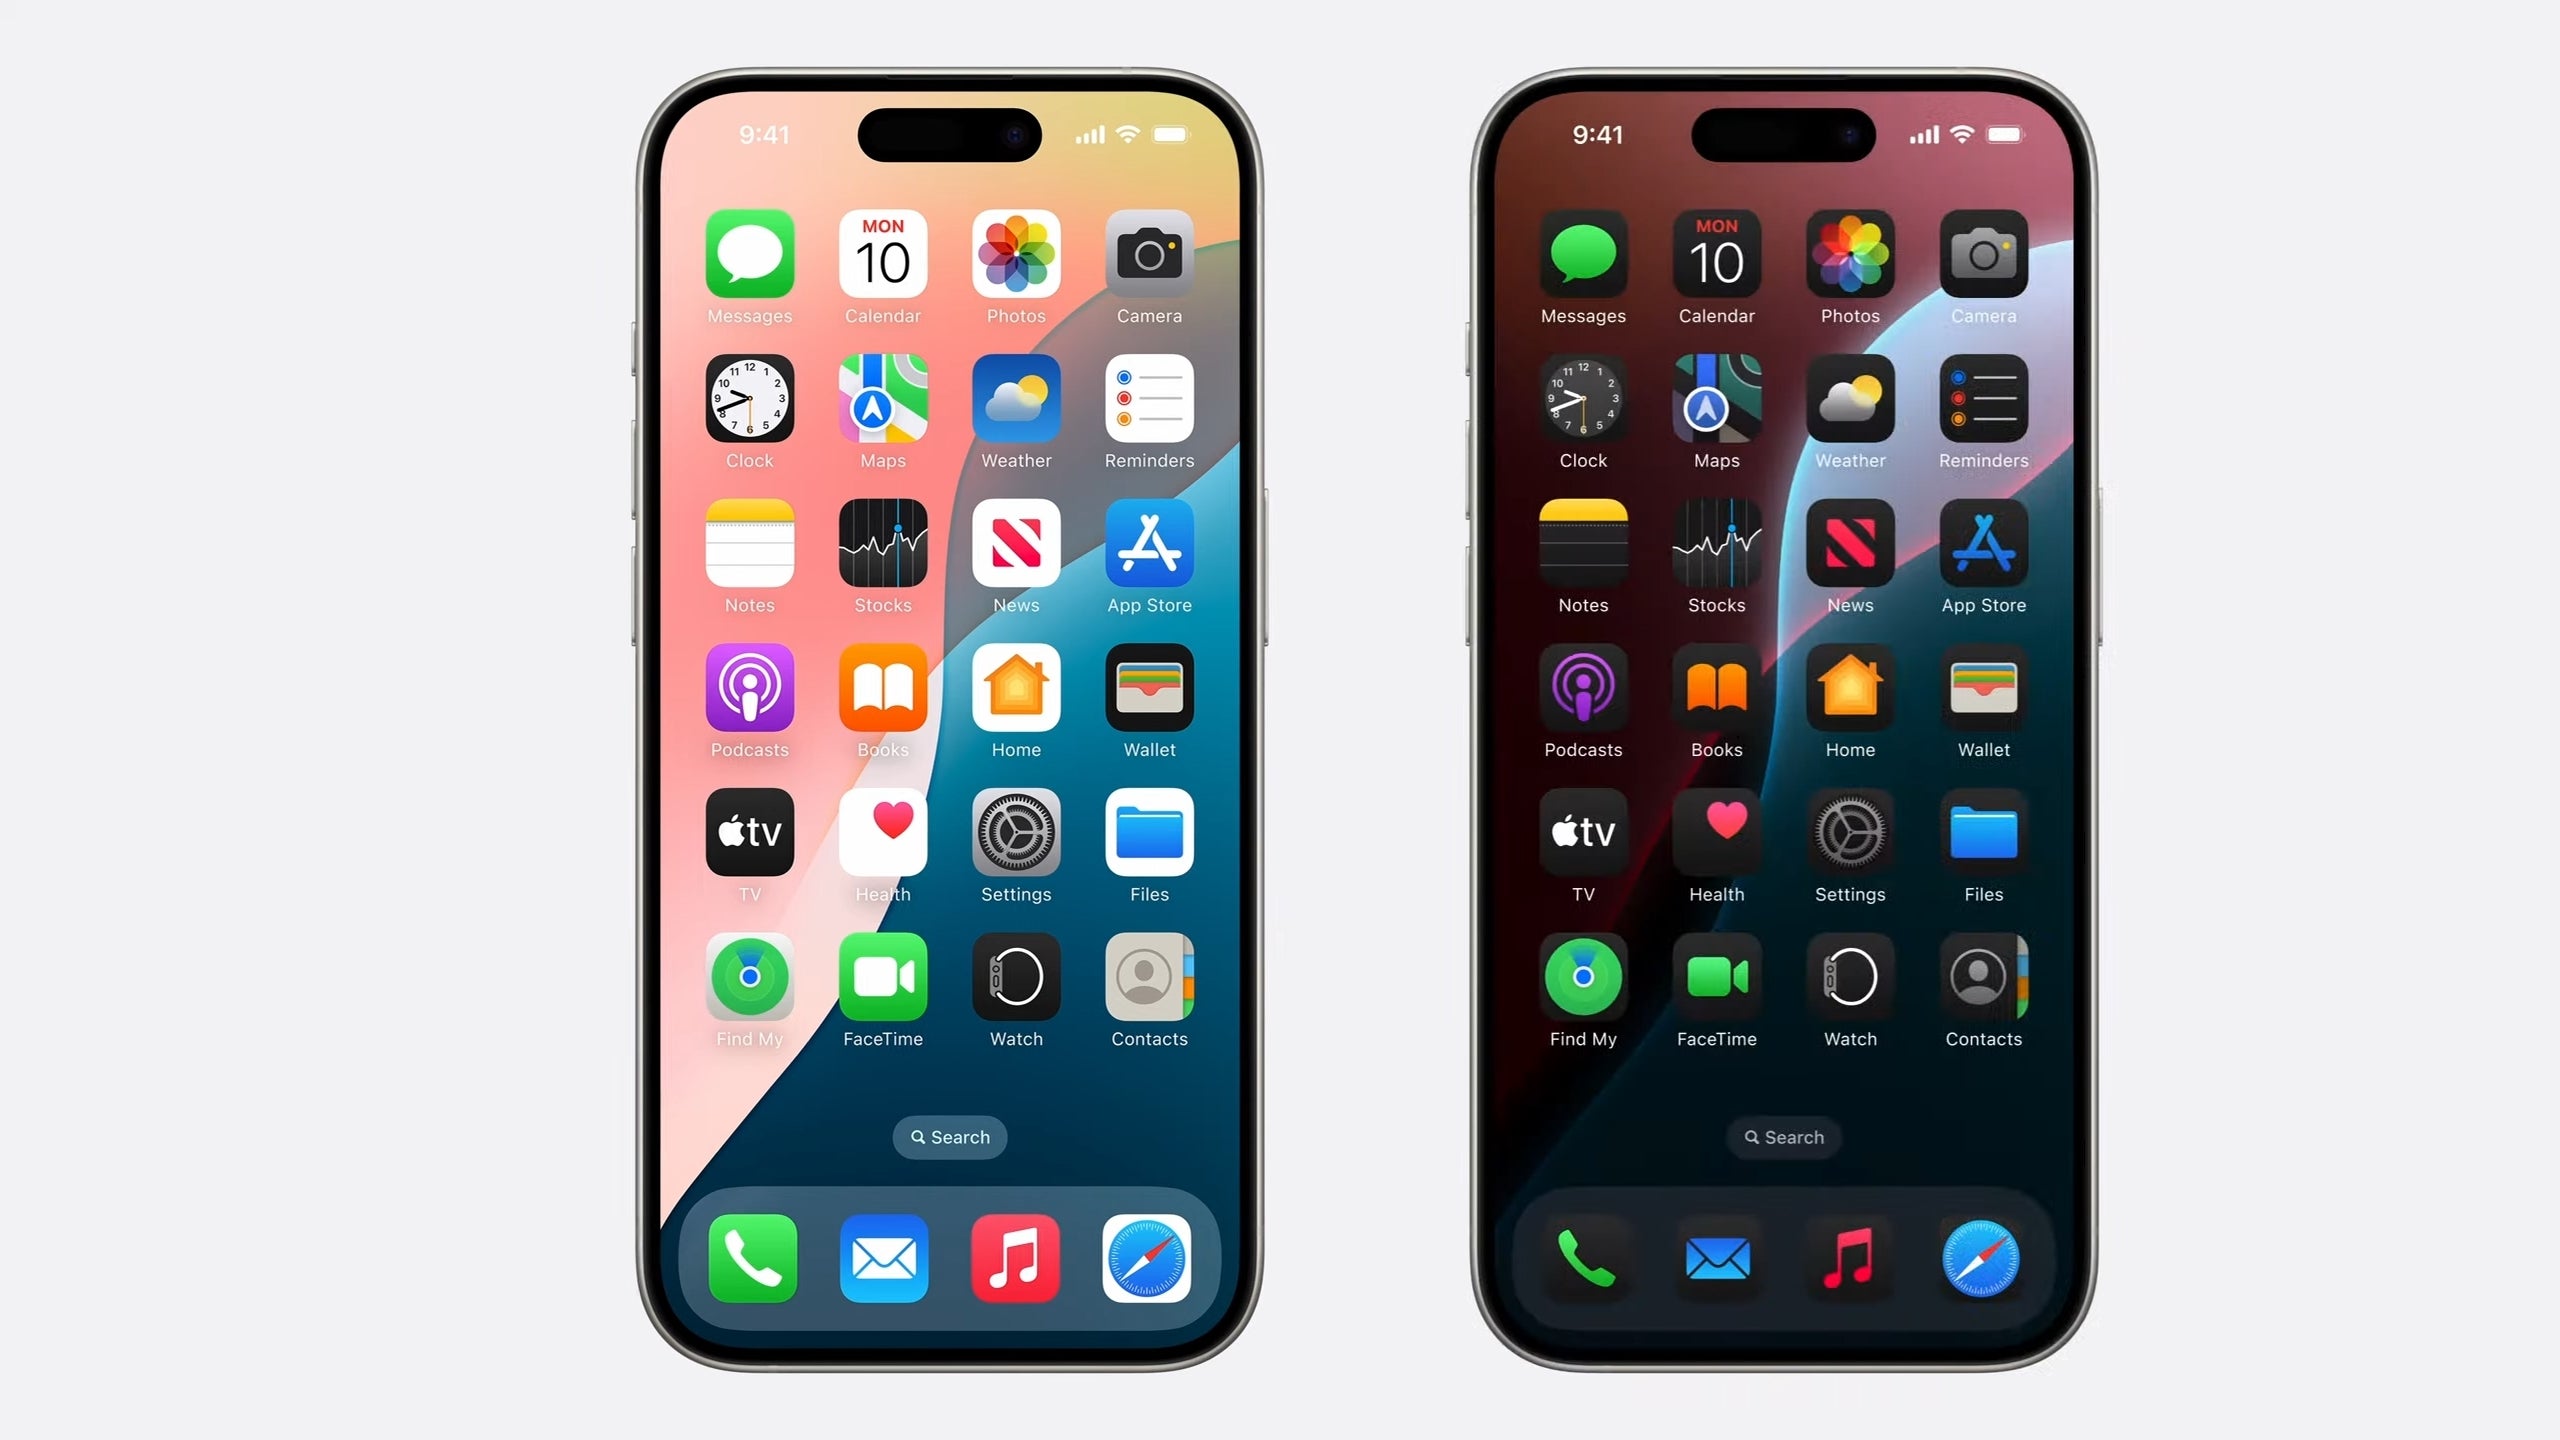 iOS 18 will give you even more customization over iOS &nbsp - iOS 18 breaks cover: A milestone update for the iPhone, powered by AI